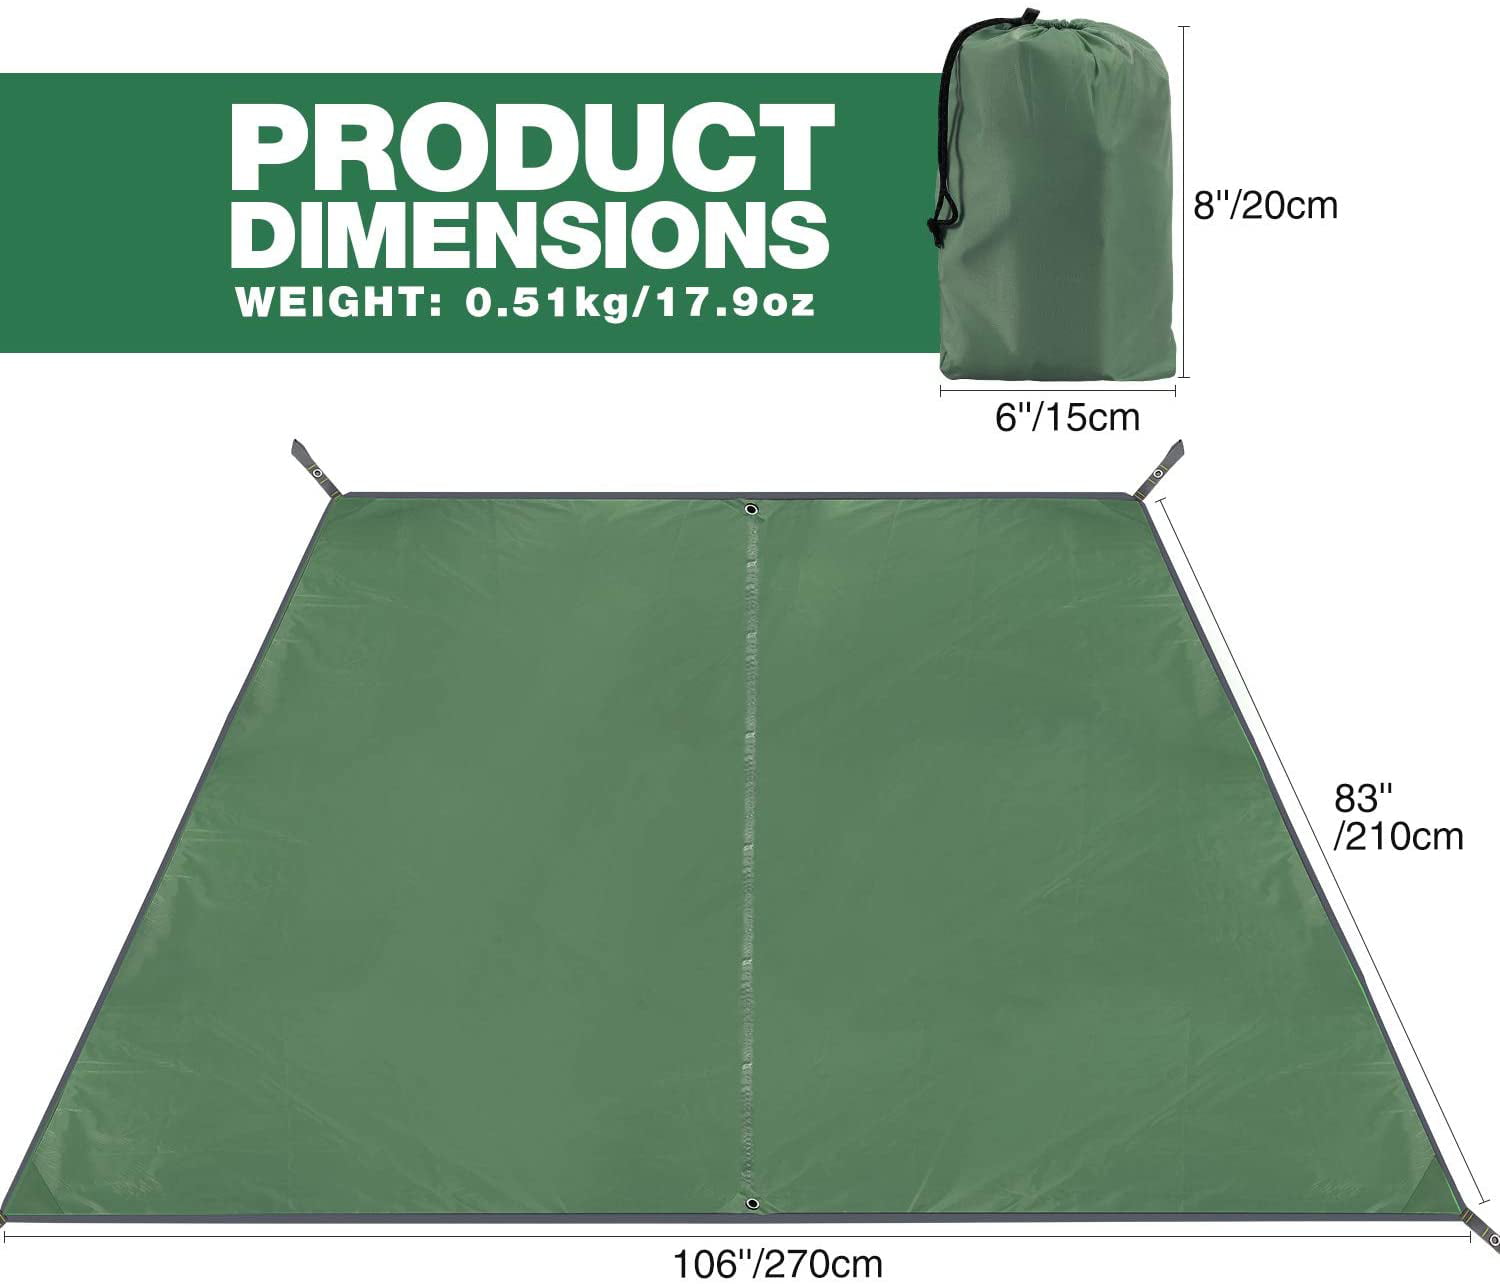 REDCAMP Waterproof Camping Tarp Lightweight to Cover Sun or Rain Small/Large 8 Sizes Compact Tent Tarp Footprint for Ground or Under Tent Black/Blue/Green